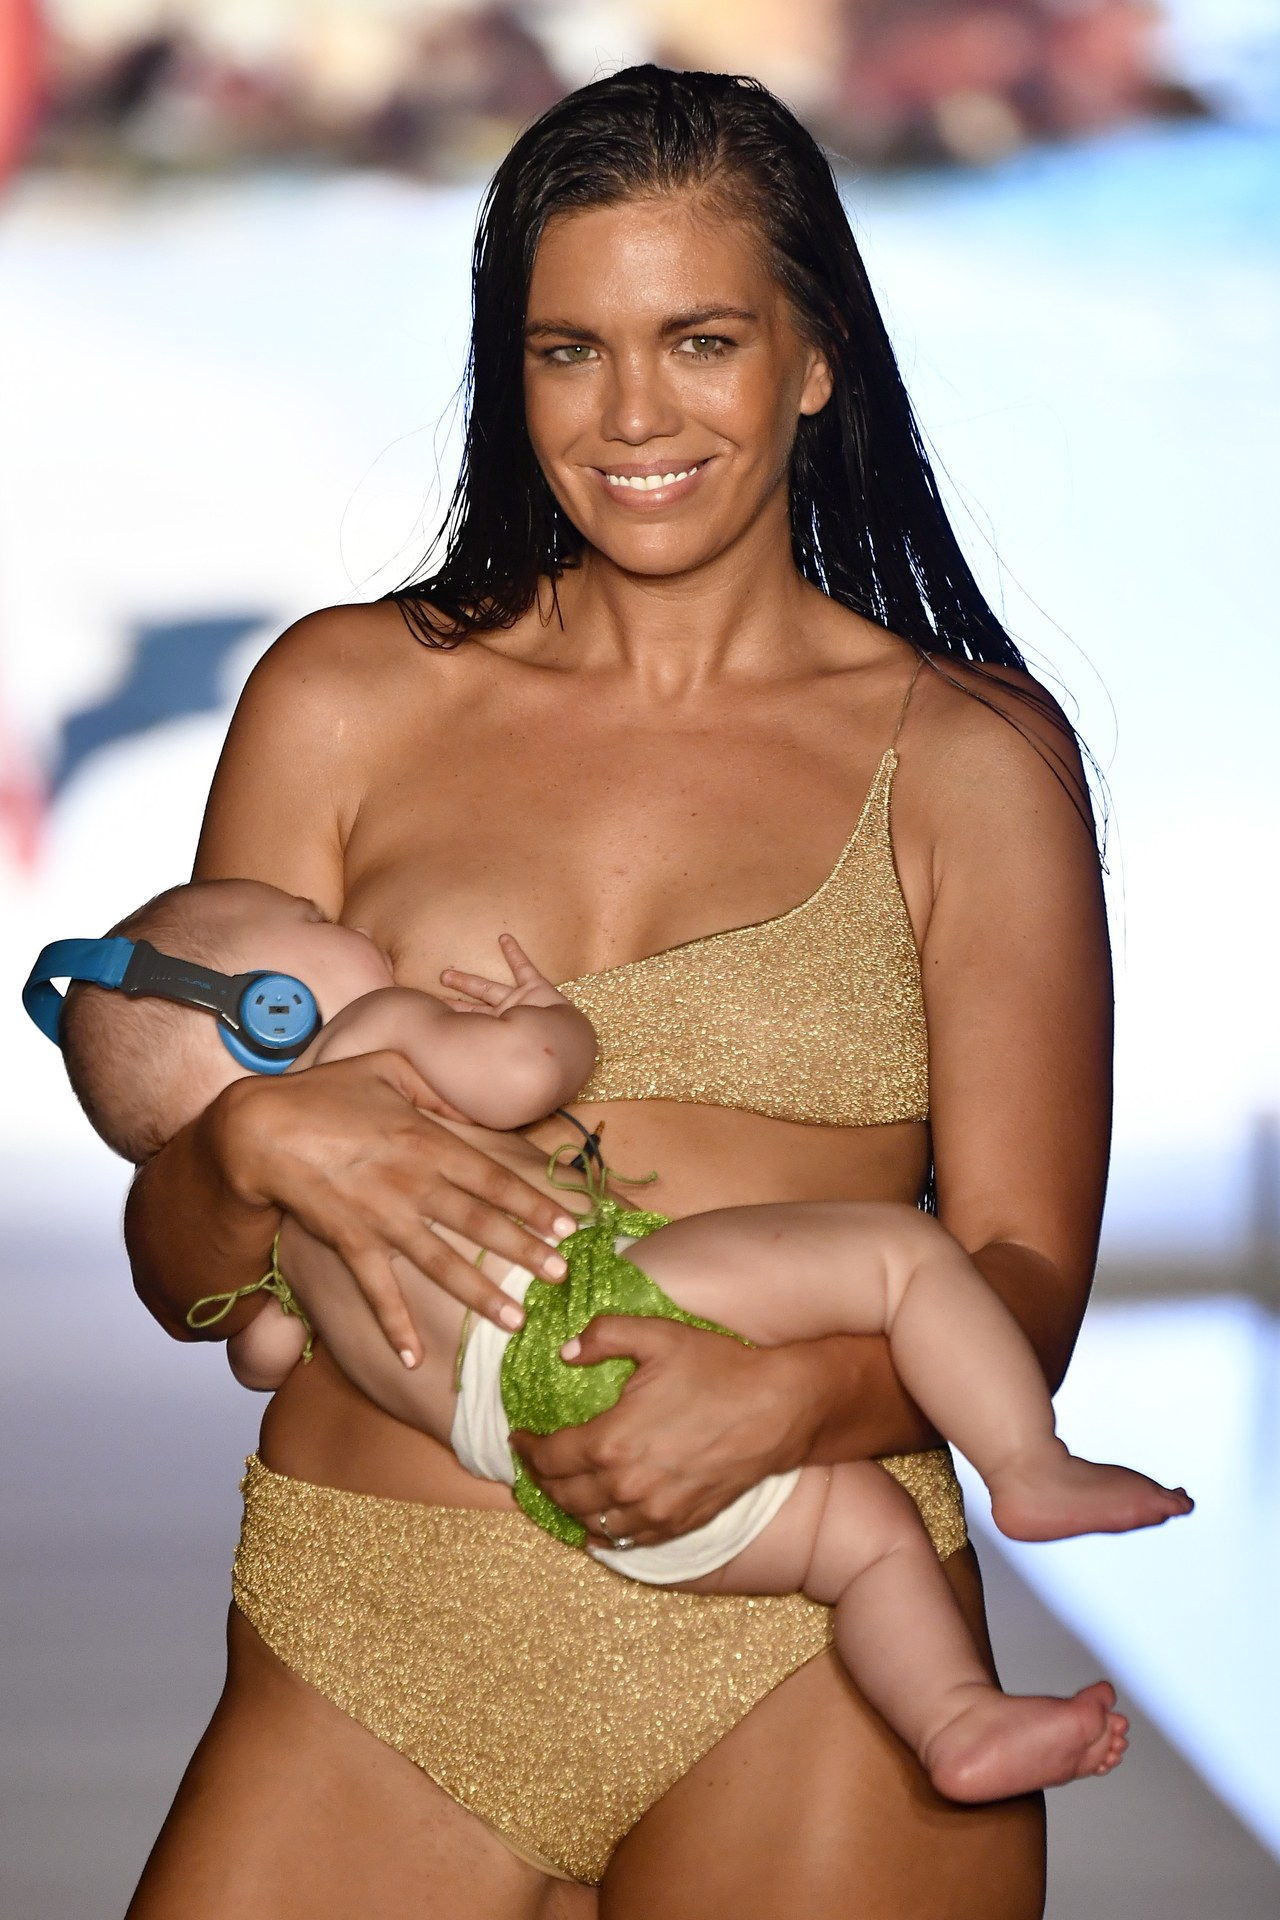 UN Model Walked the Runway Breastfeeding Her 5-Month-Old Baby 3